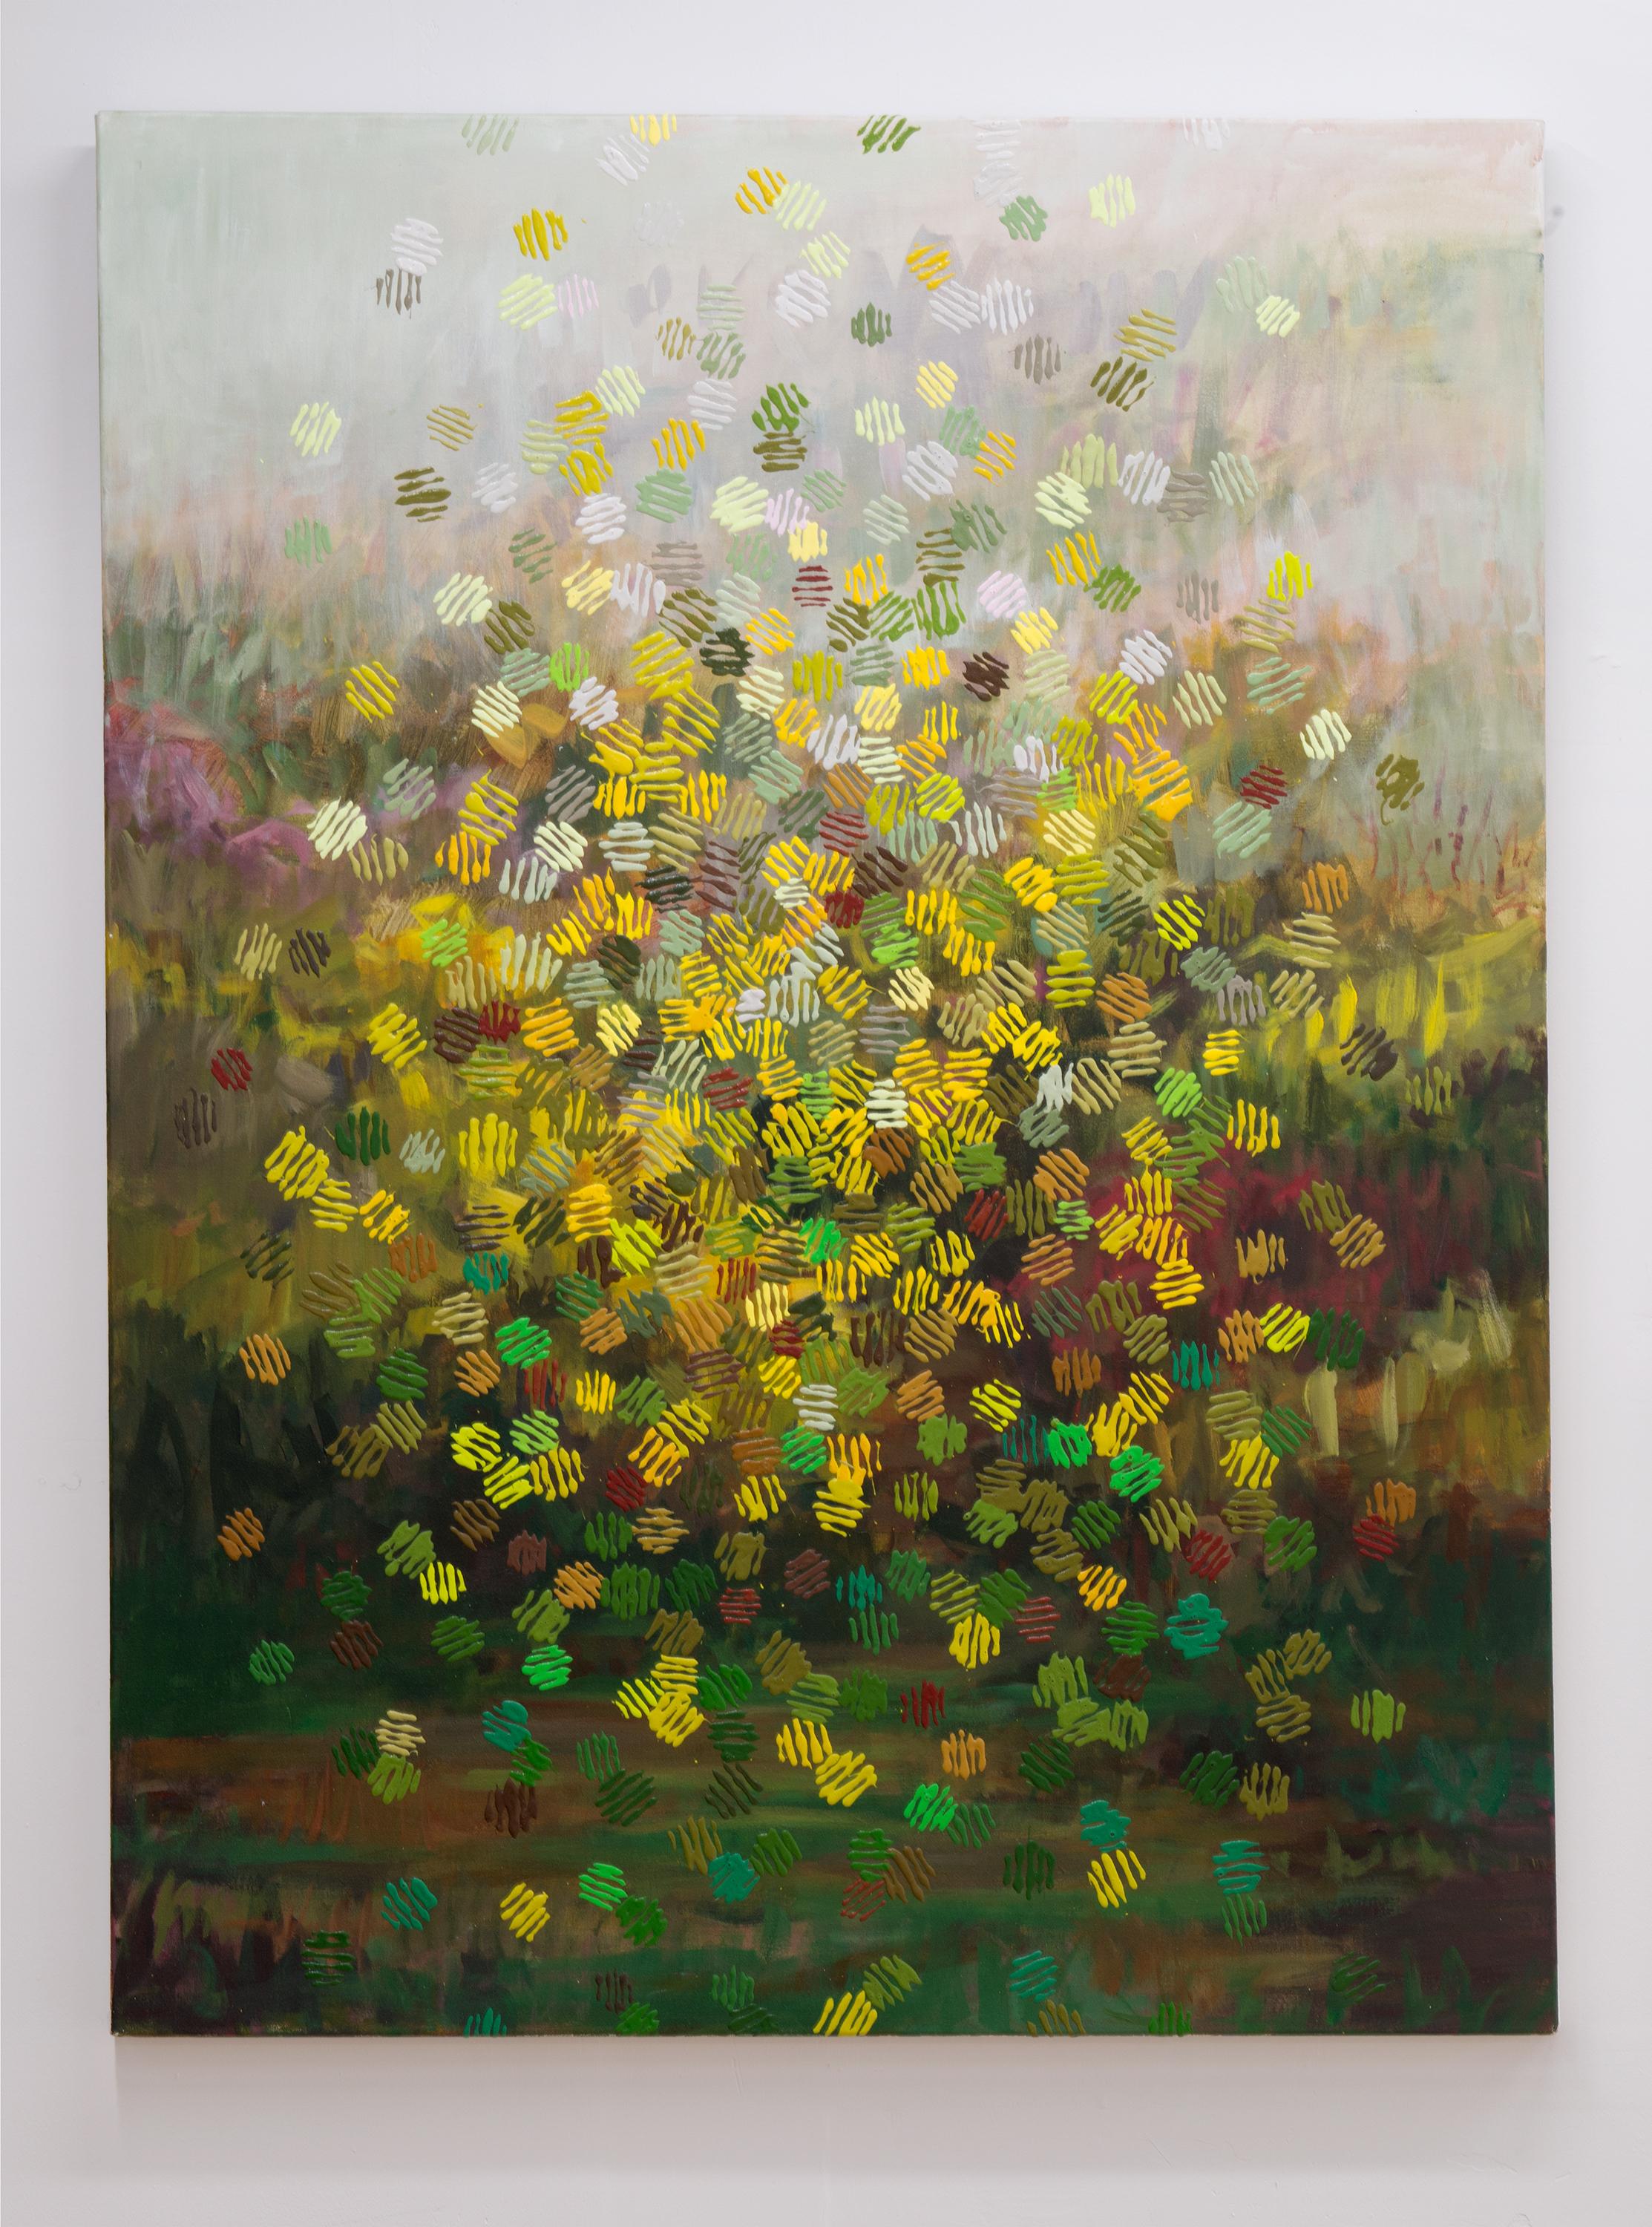 RAIN BOKEH - Large Acrylic on Canvas Painting of Landscape w/ Abstract Shapes - Brown Landscape Painting by Amanda Joy Brown